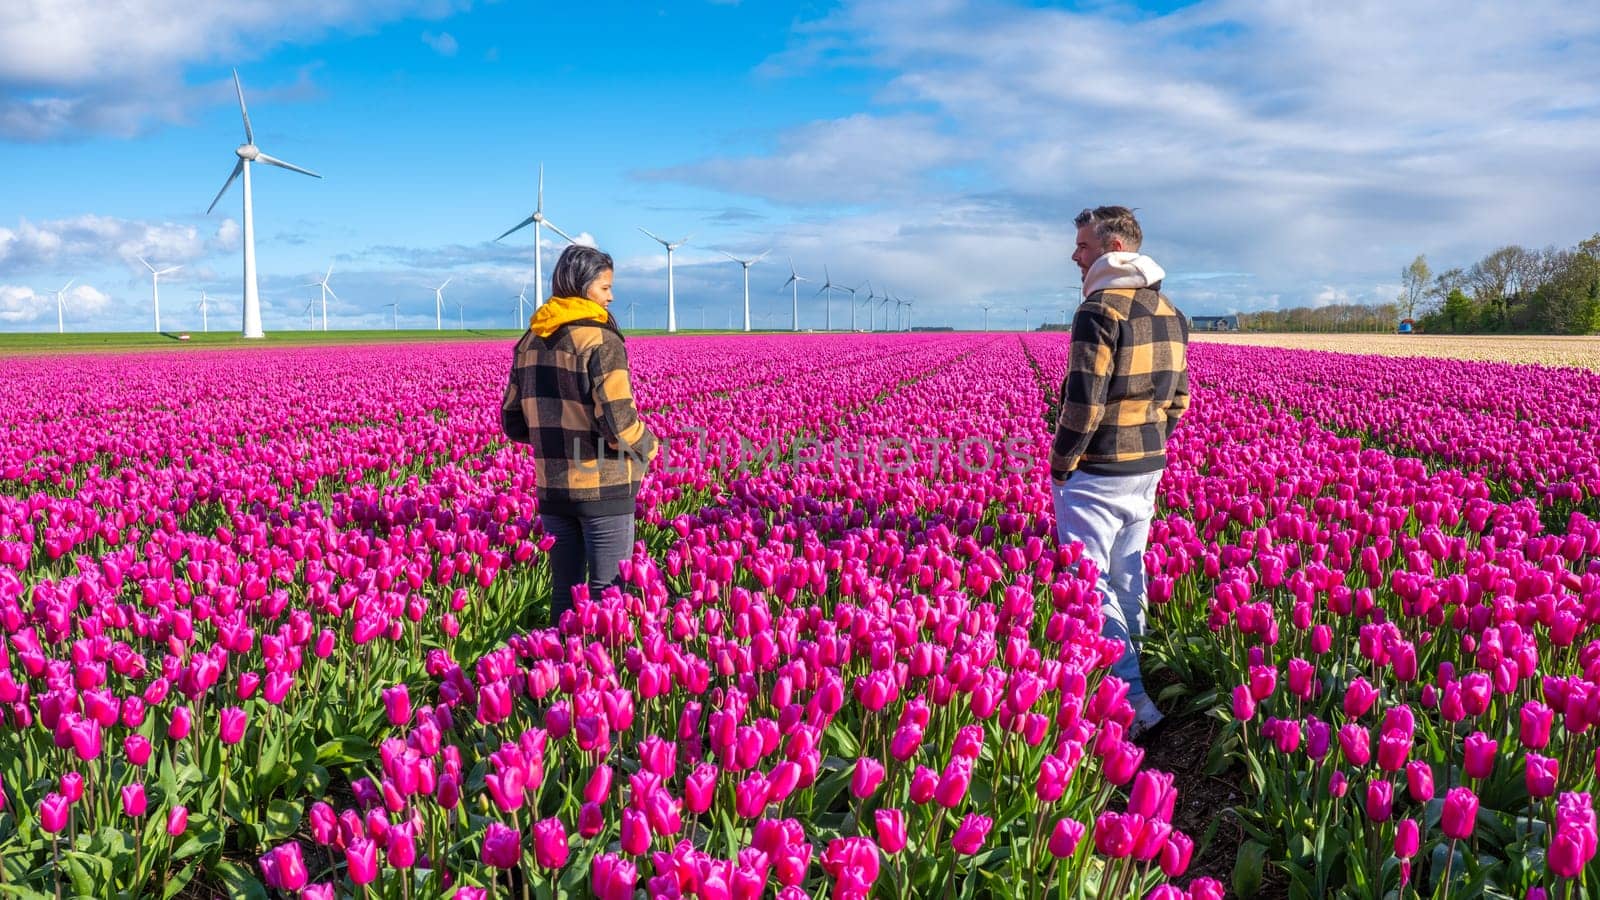 Two people standing gracefully in a vibrant field of purple tulips, surrounded by the beauty of nature in full bloom. a couple of men and women in a flower field